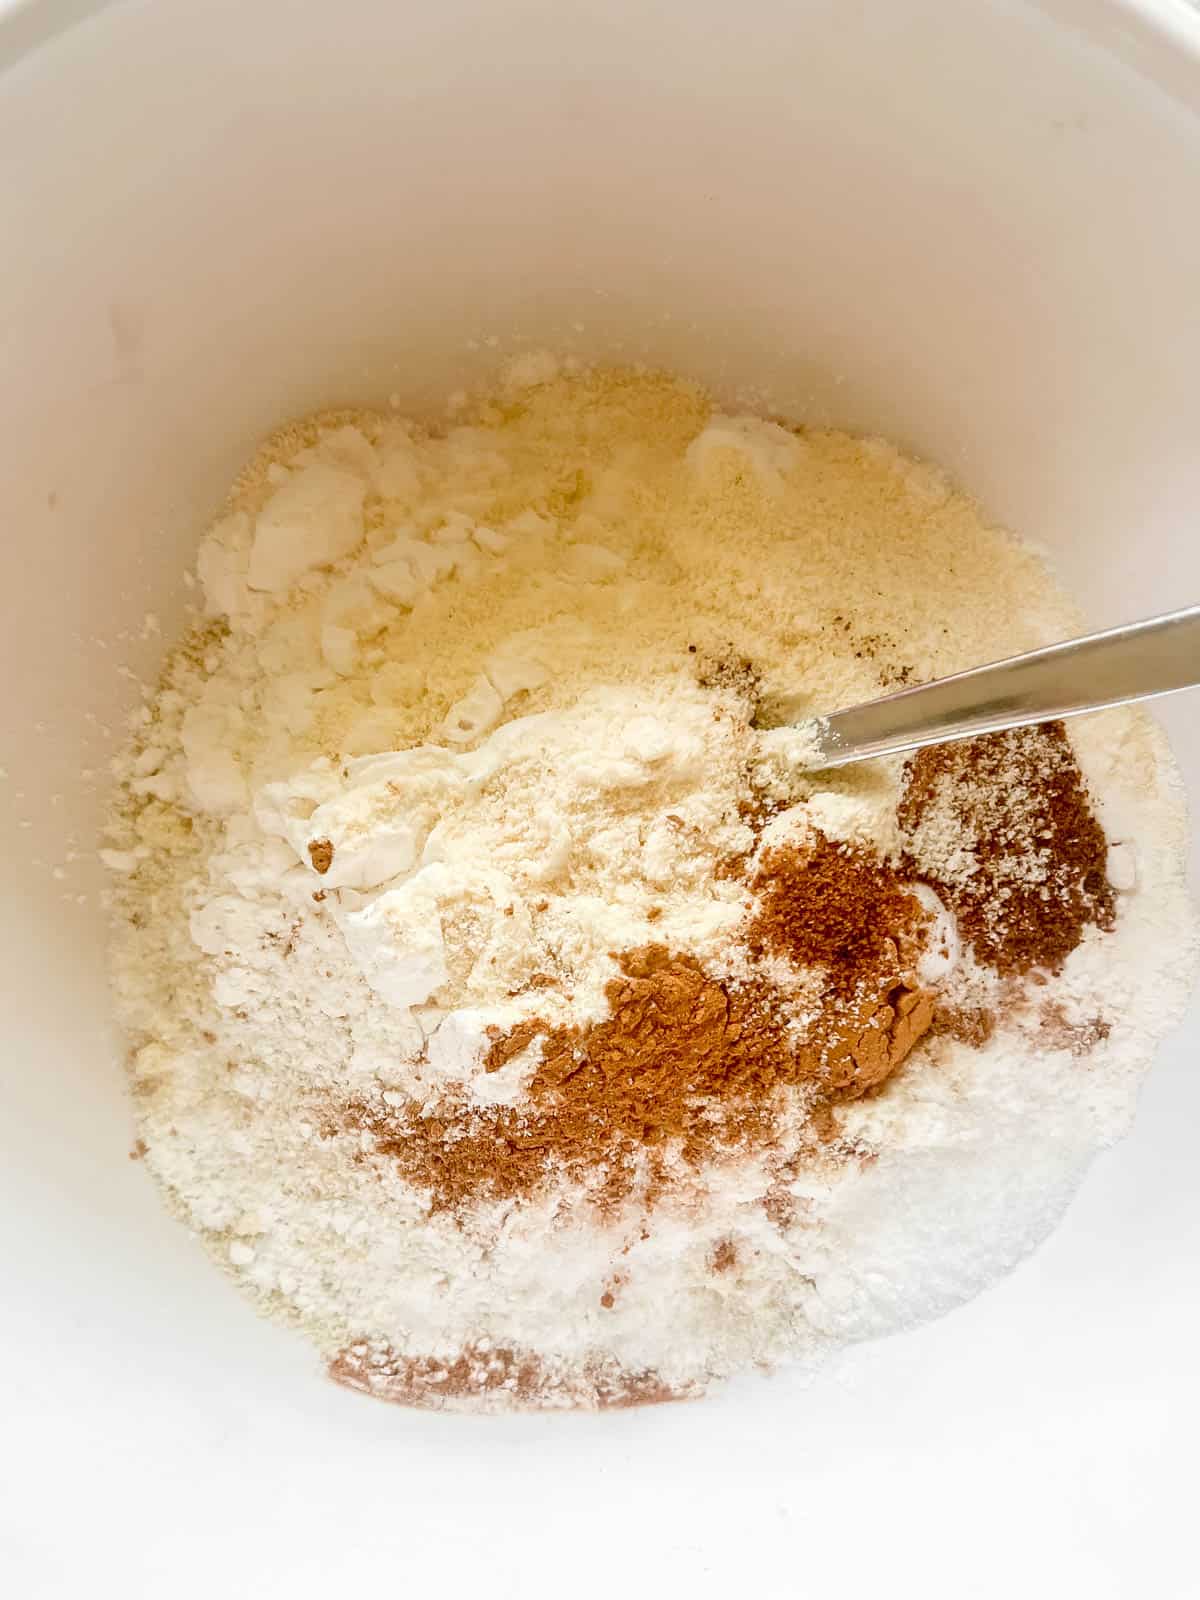 Carrot banana bread dry ingredients in a bowl.